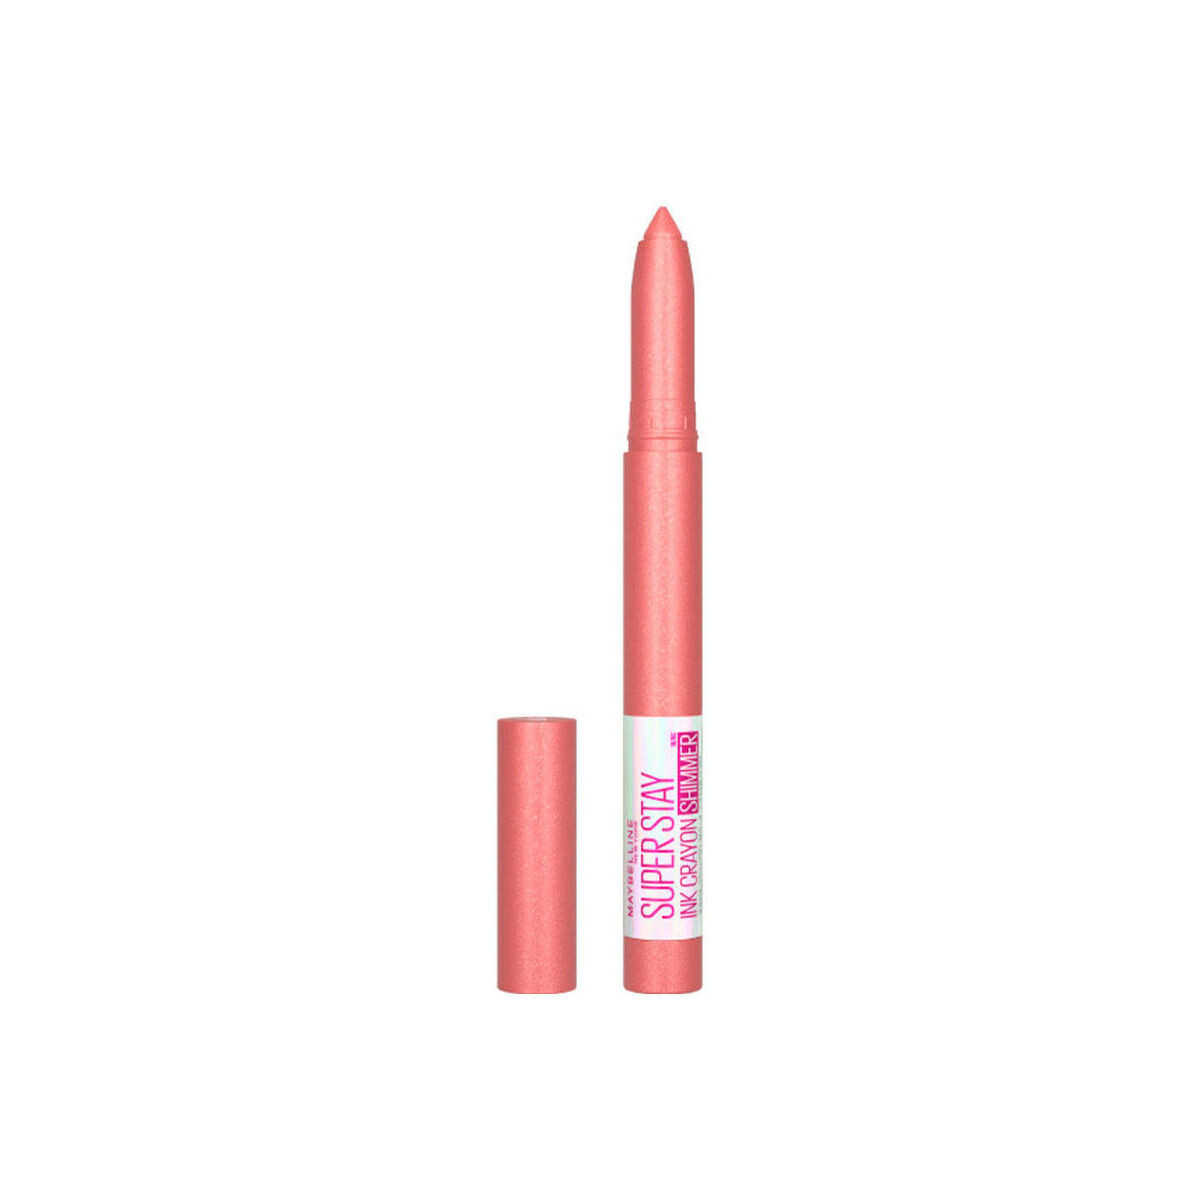 Beauty Damen Lippenstift Maybelline New York Superstay Ink Crayon Shimmer 190-blow The Candle 